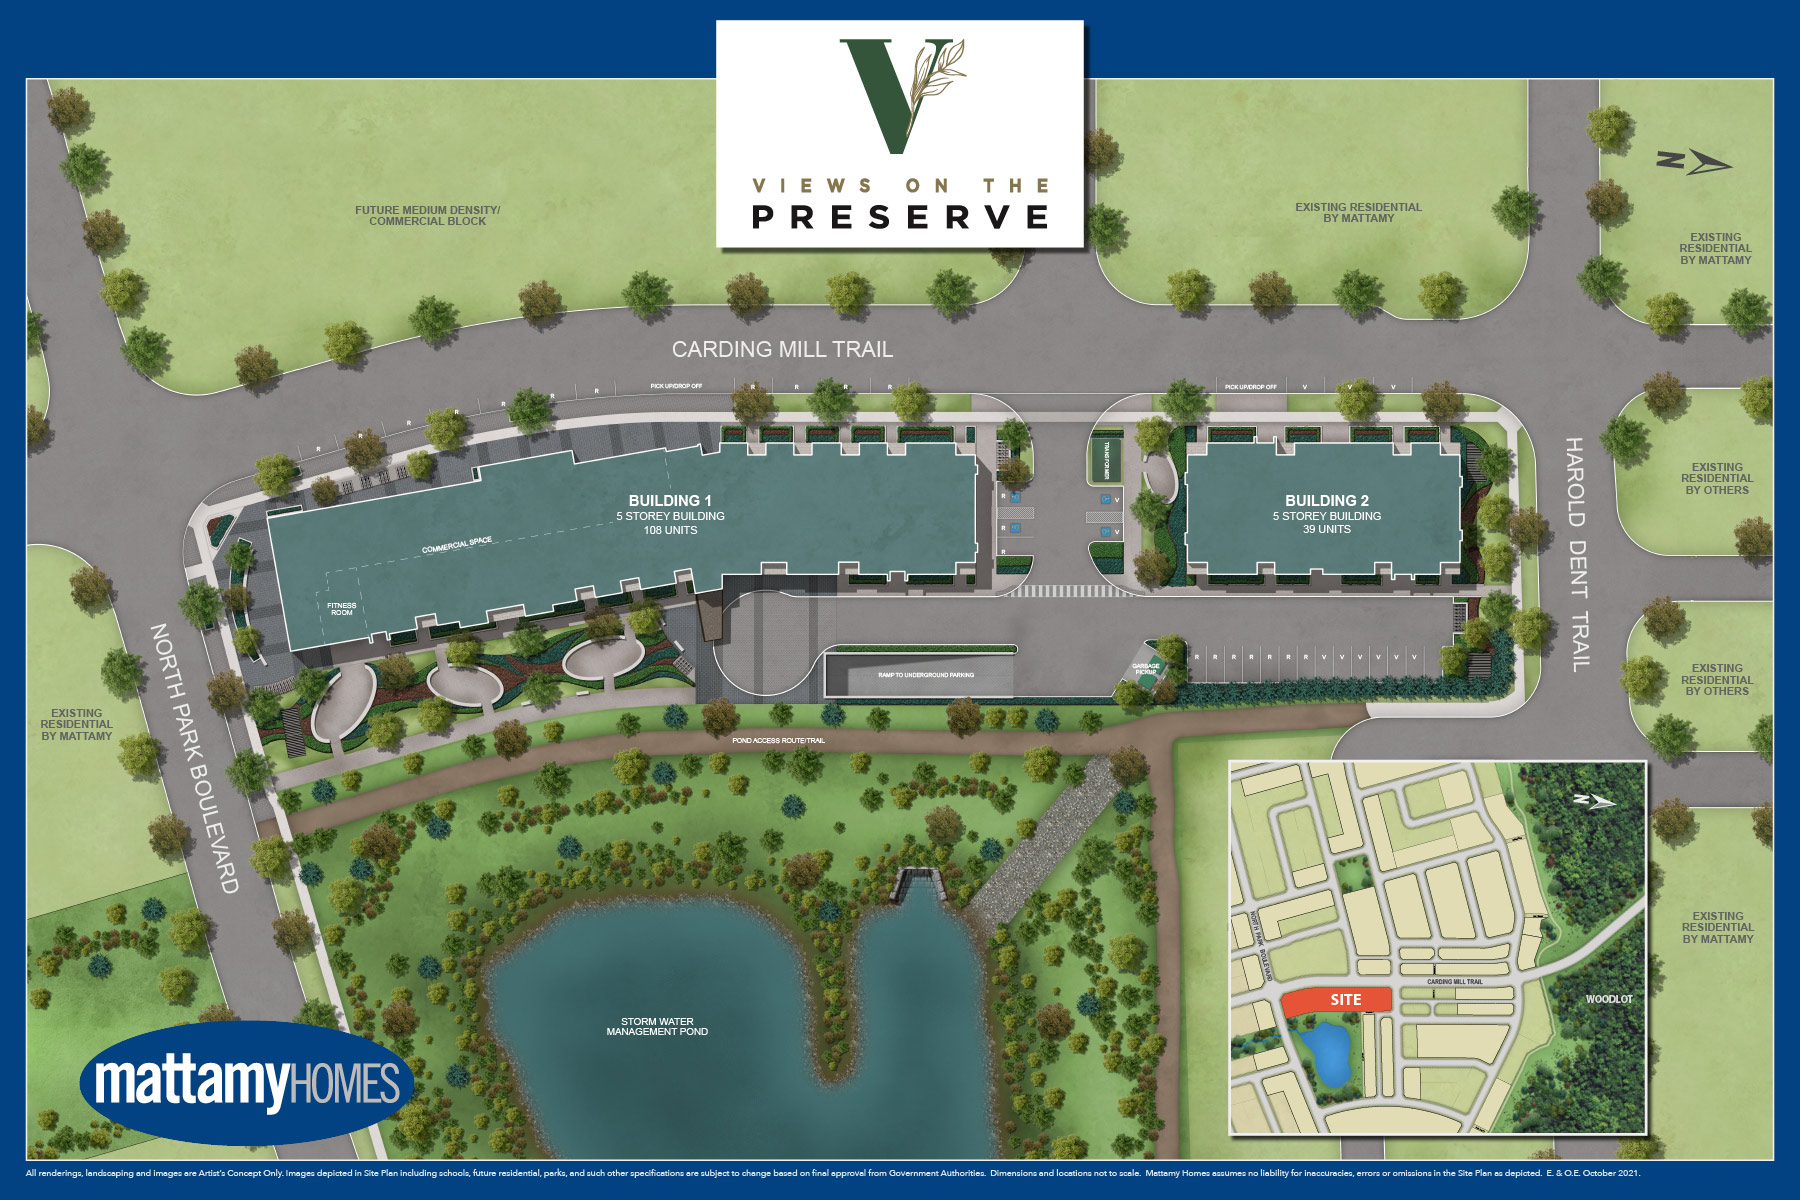 Site plan for Views on the Preserve in Oakville, Ontario